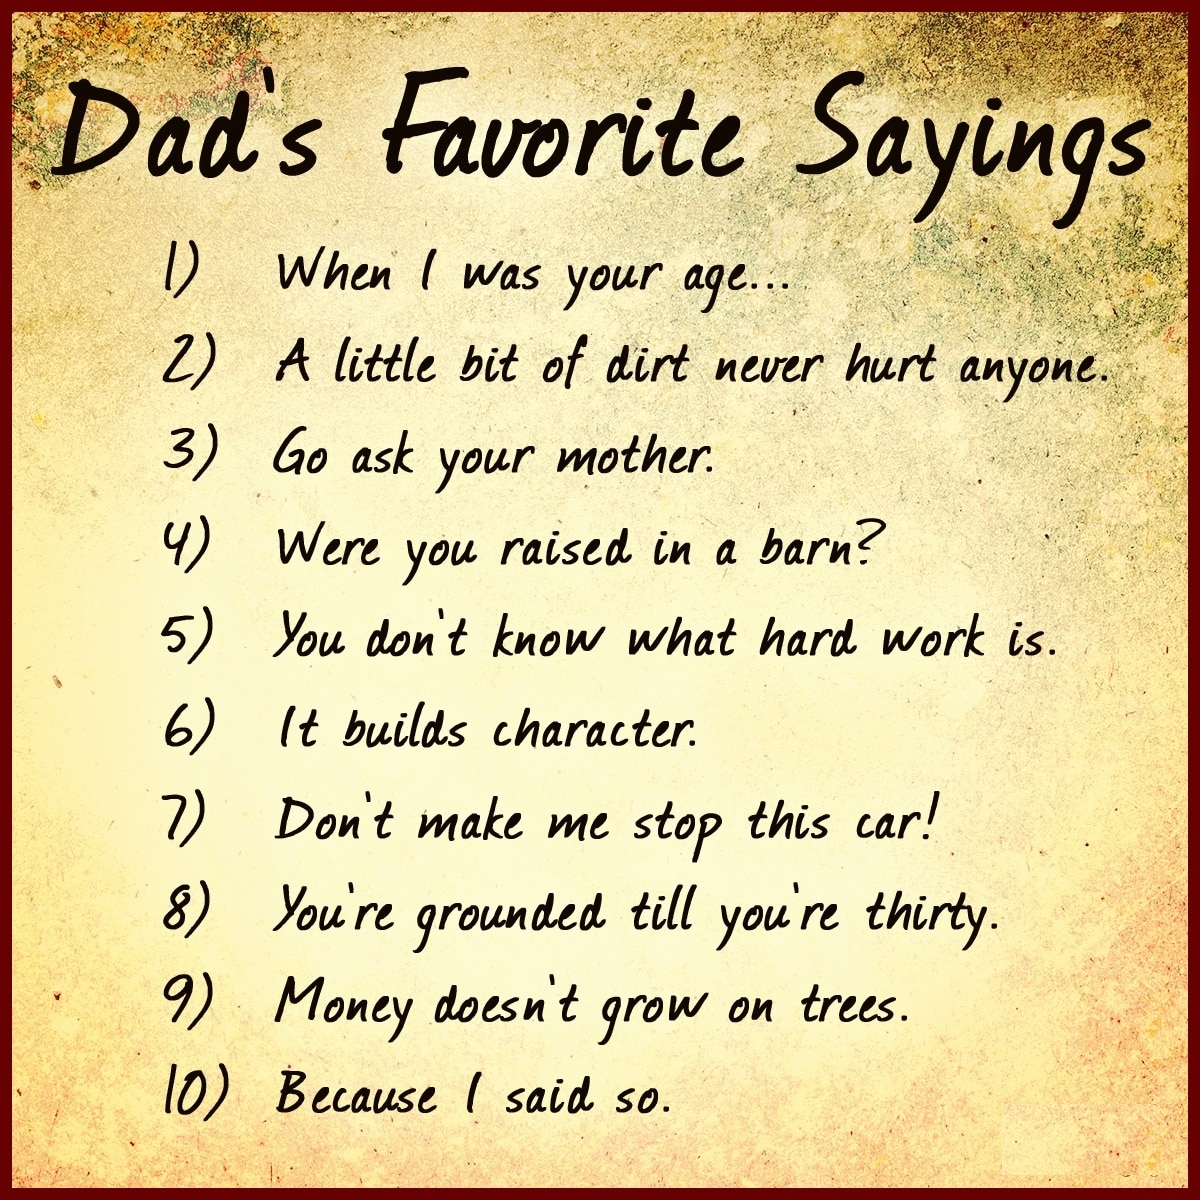 Fathers Day Saying 